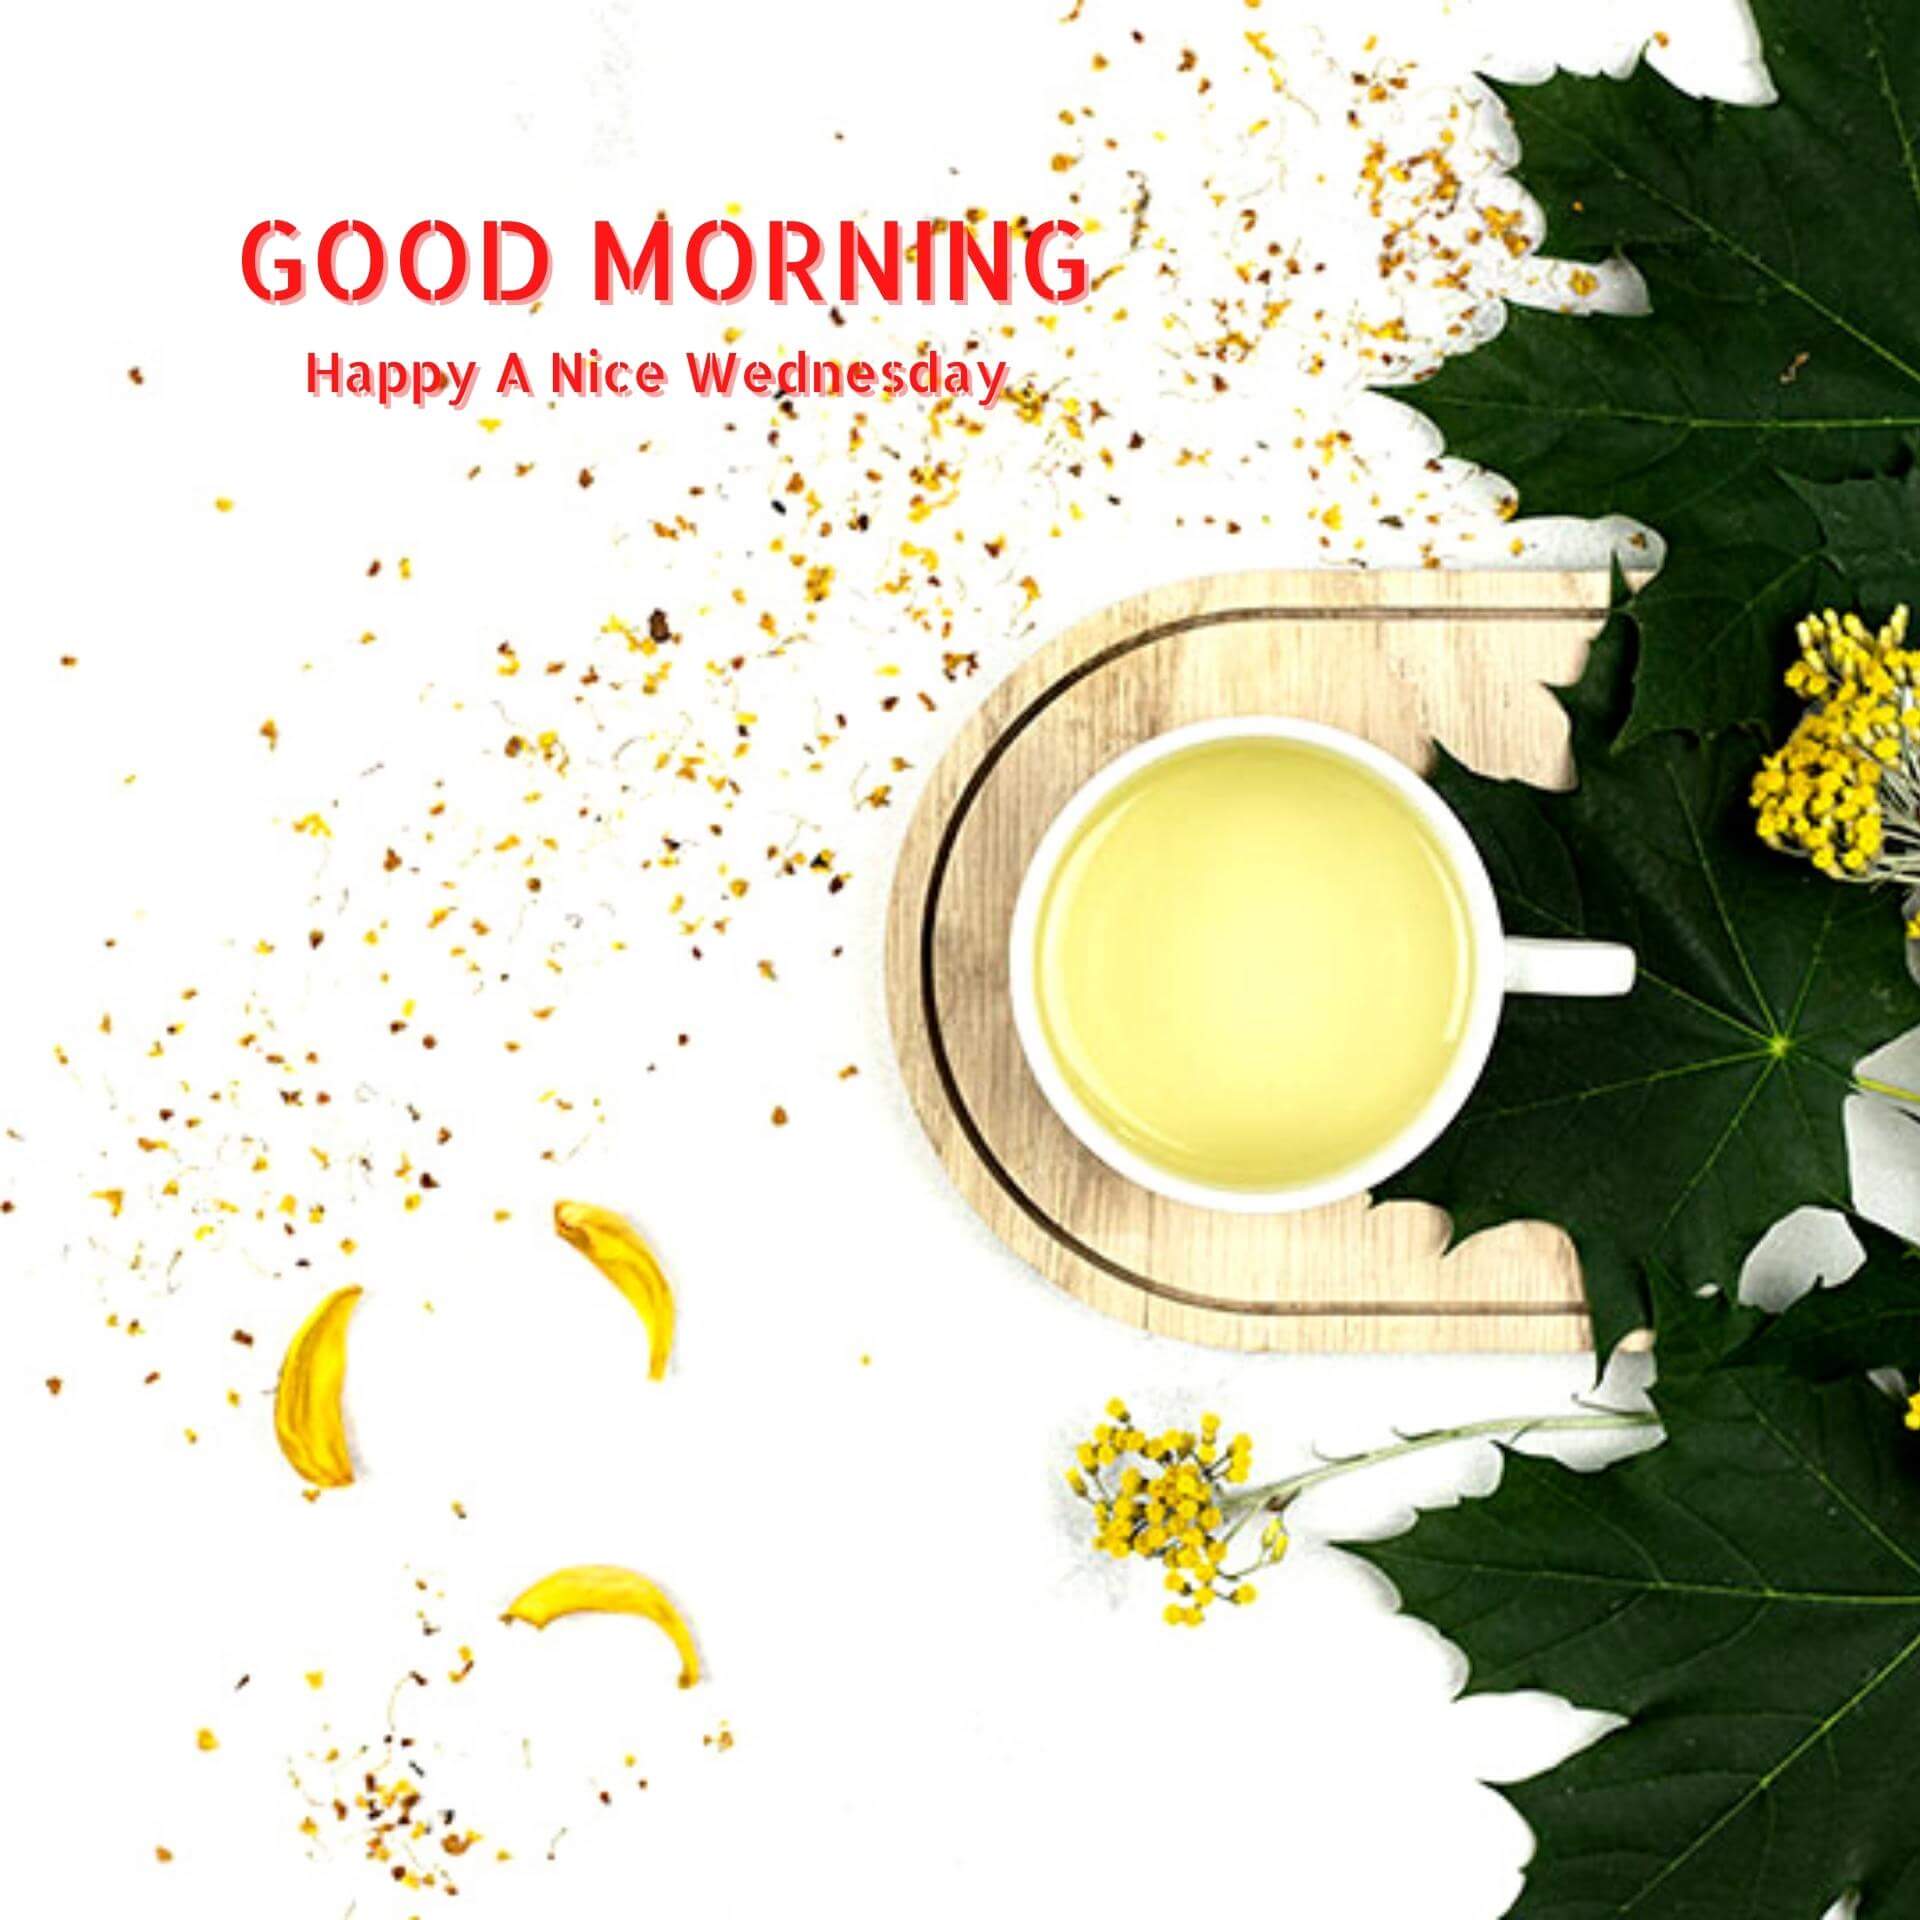 Wednesday good morning Pics Wallpaper New Download